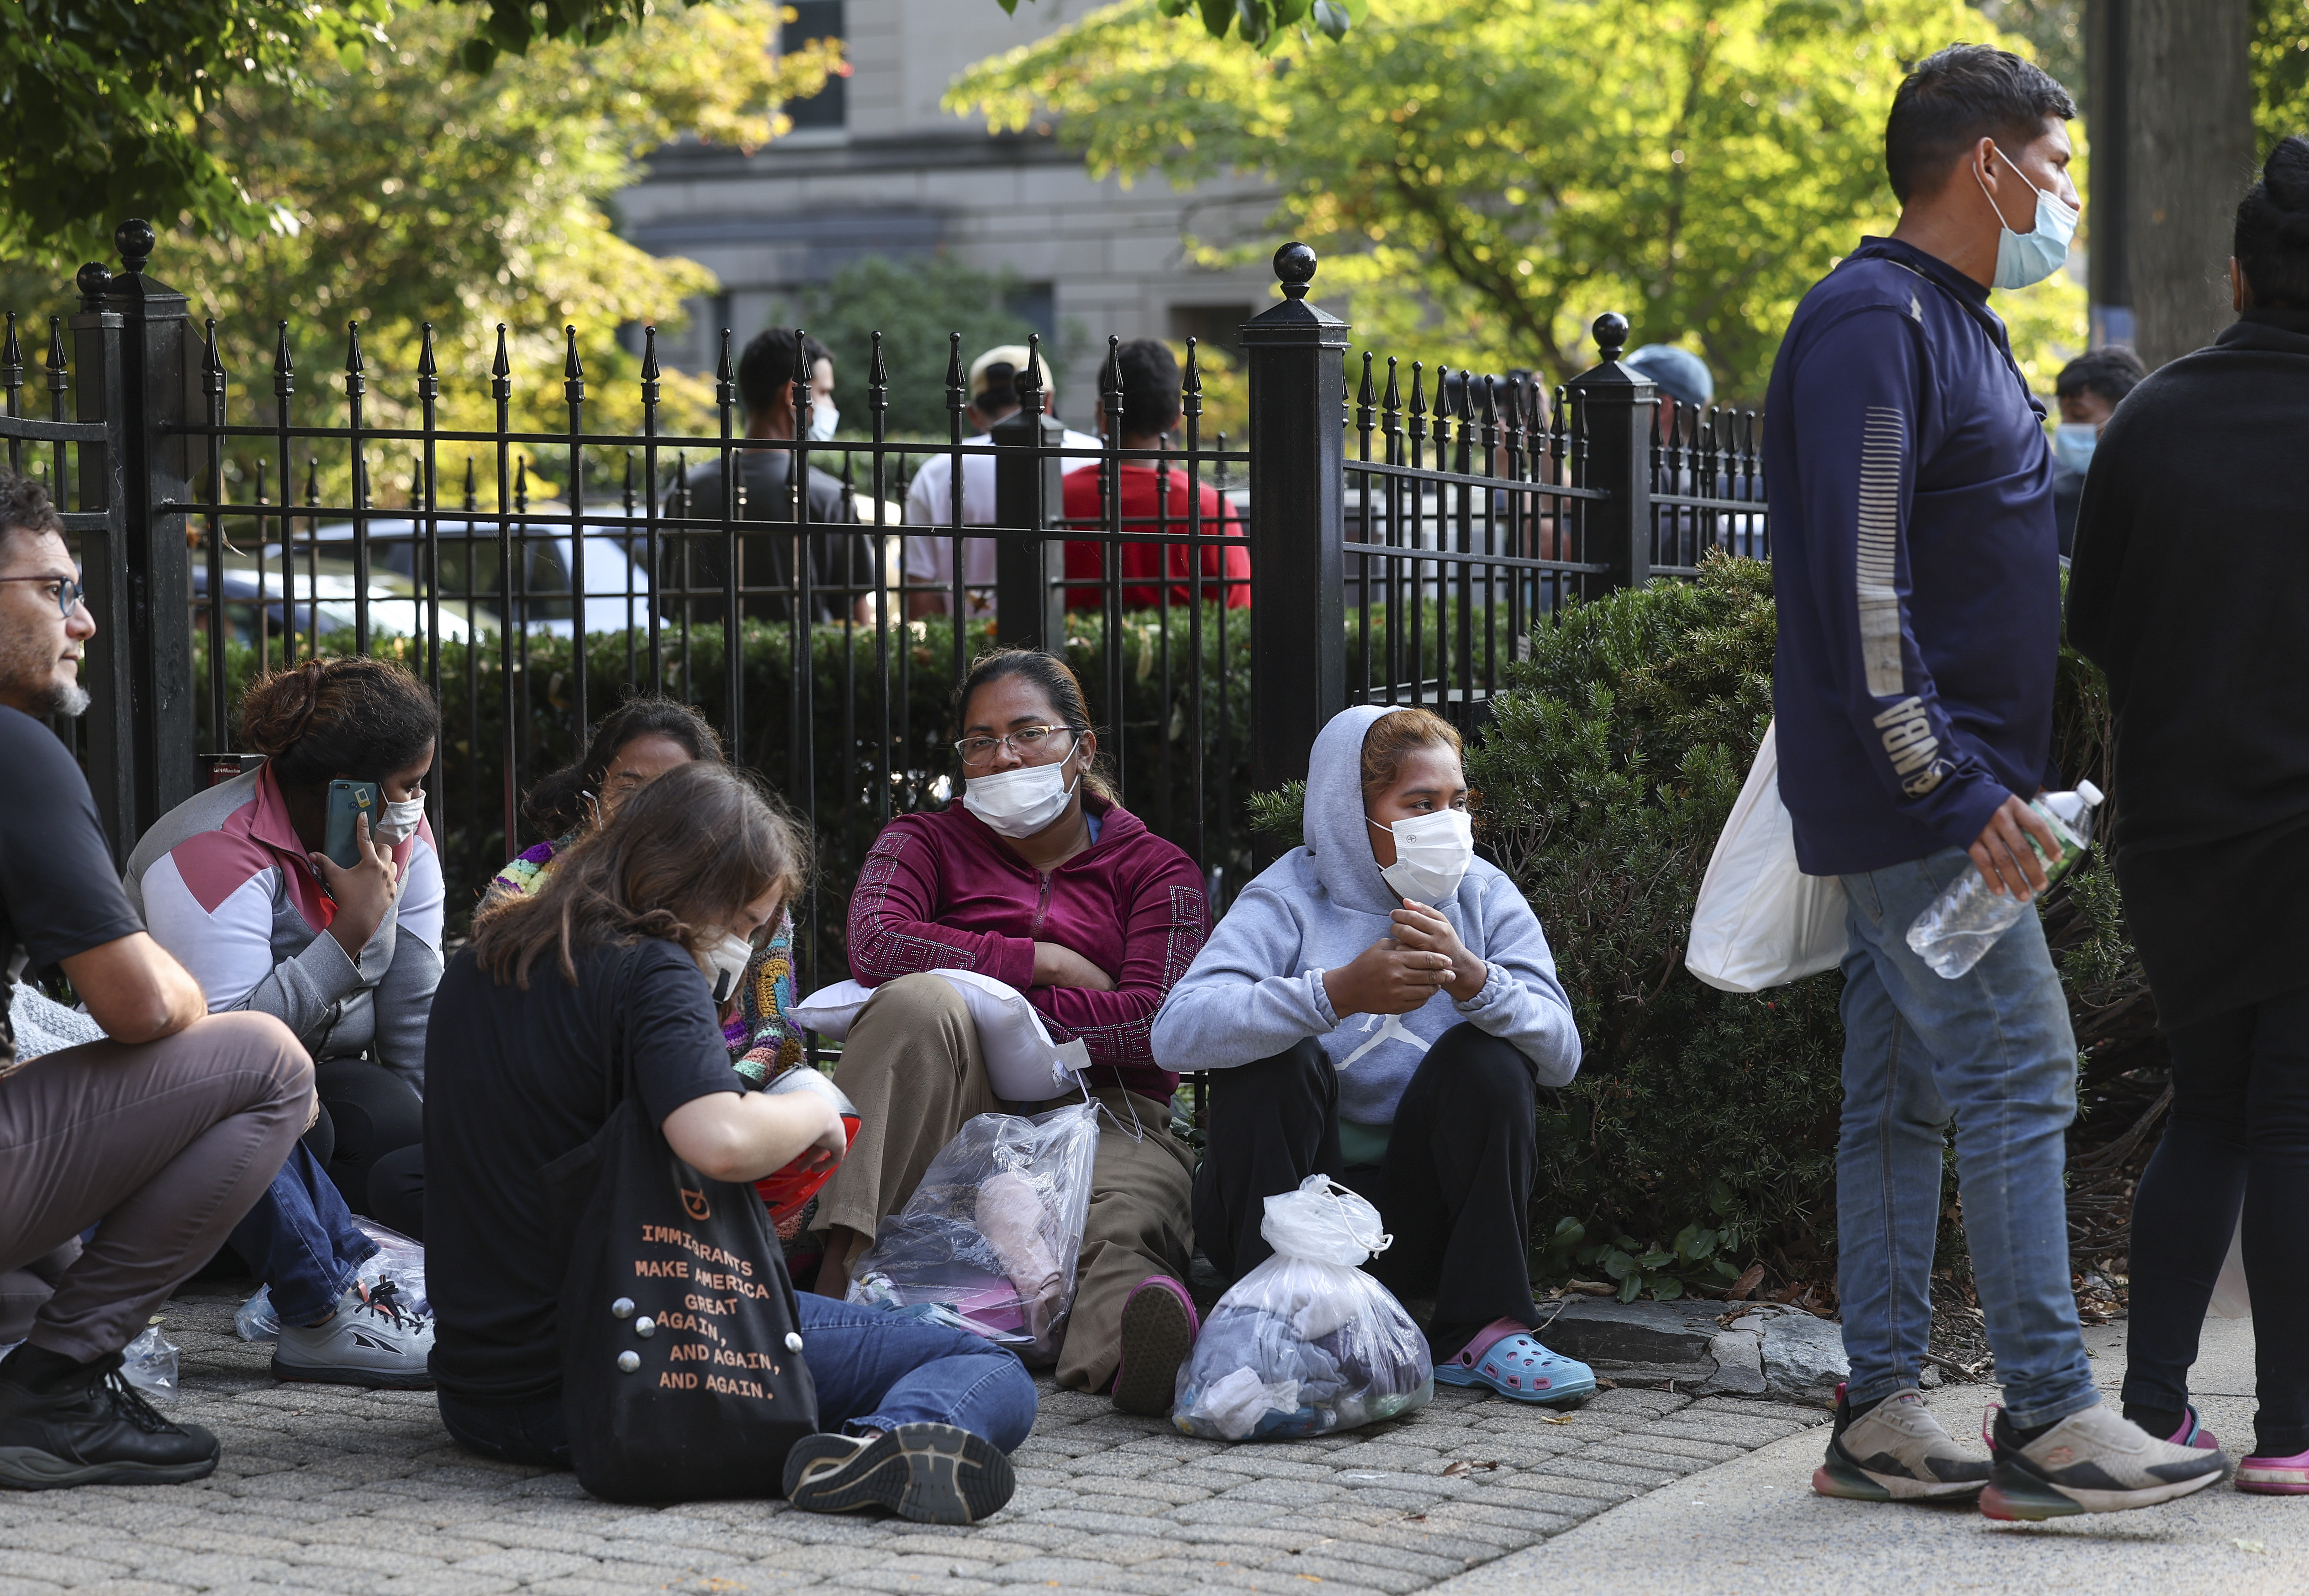 Migrants from Central and South America wait near the residence of Vice President Kamala Harris after being dropped off on Sept. 15, 2022, in Washington, D.C.